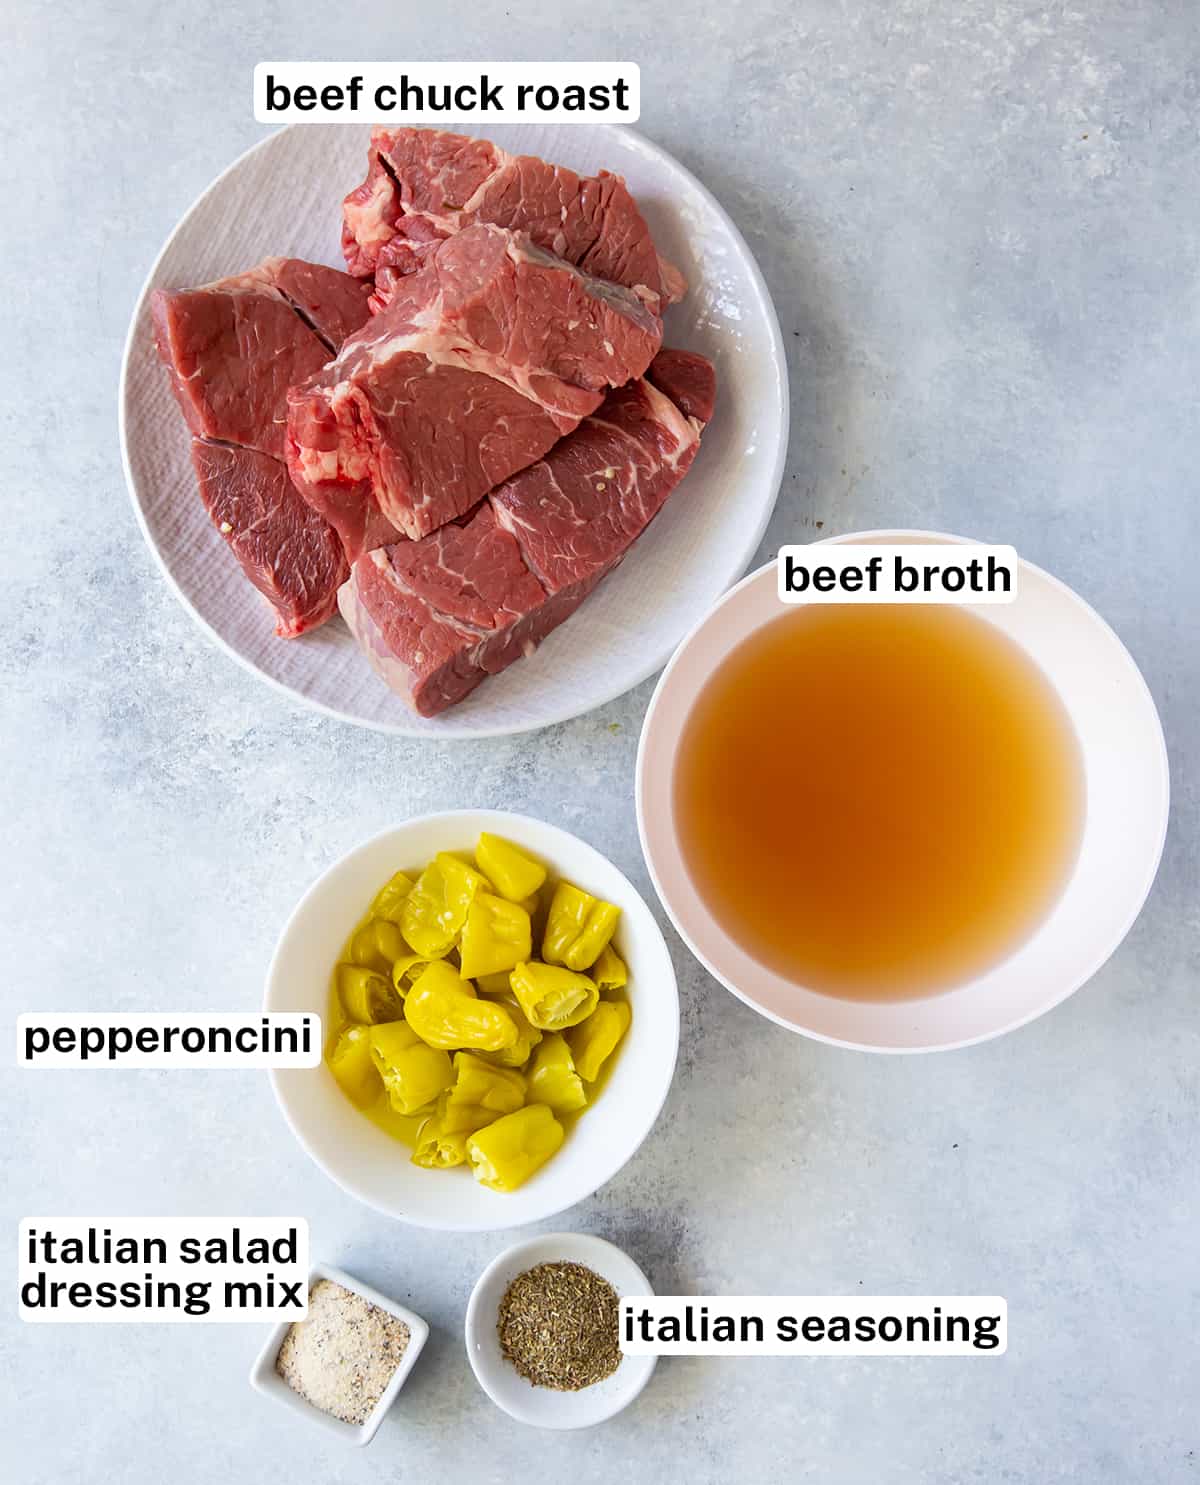 Chuck roast, pepperoncini and other ingredients for Italian Beef with overlay text.